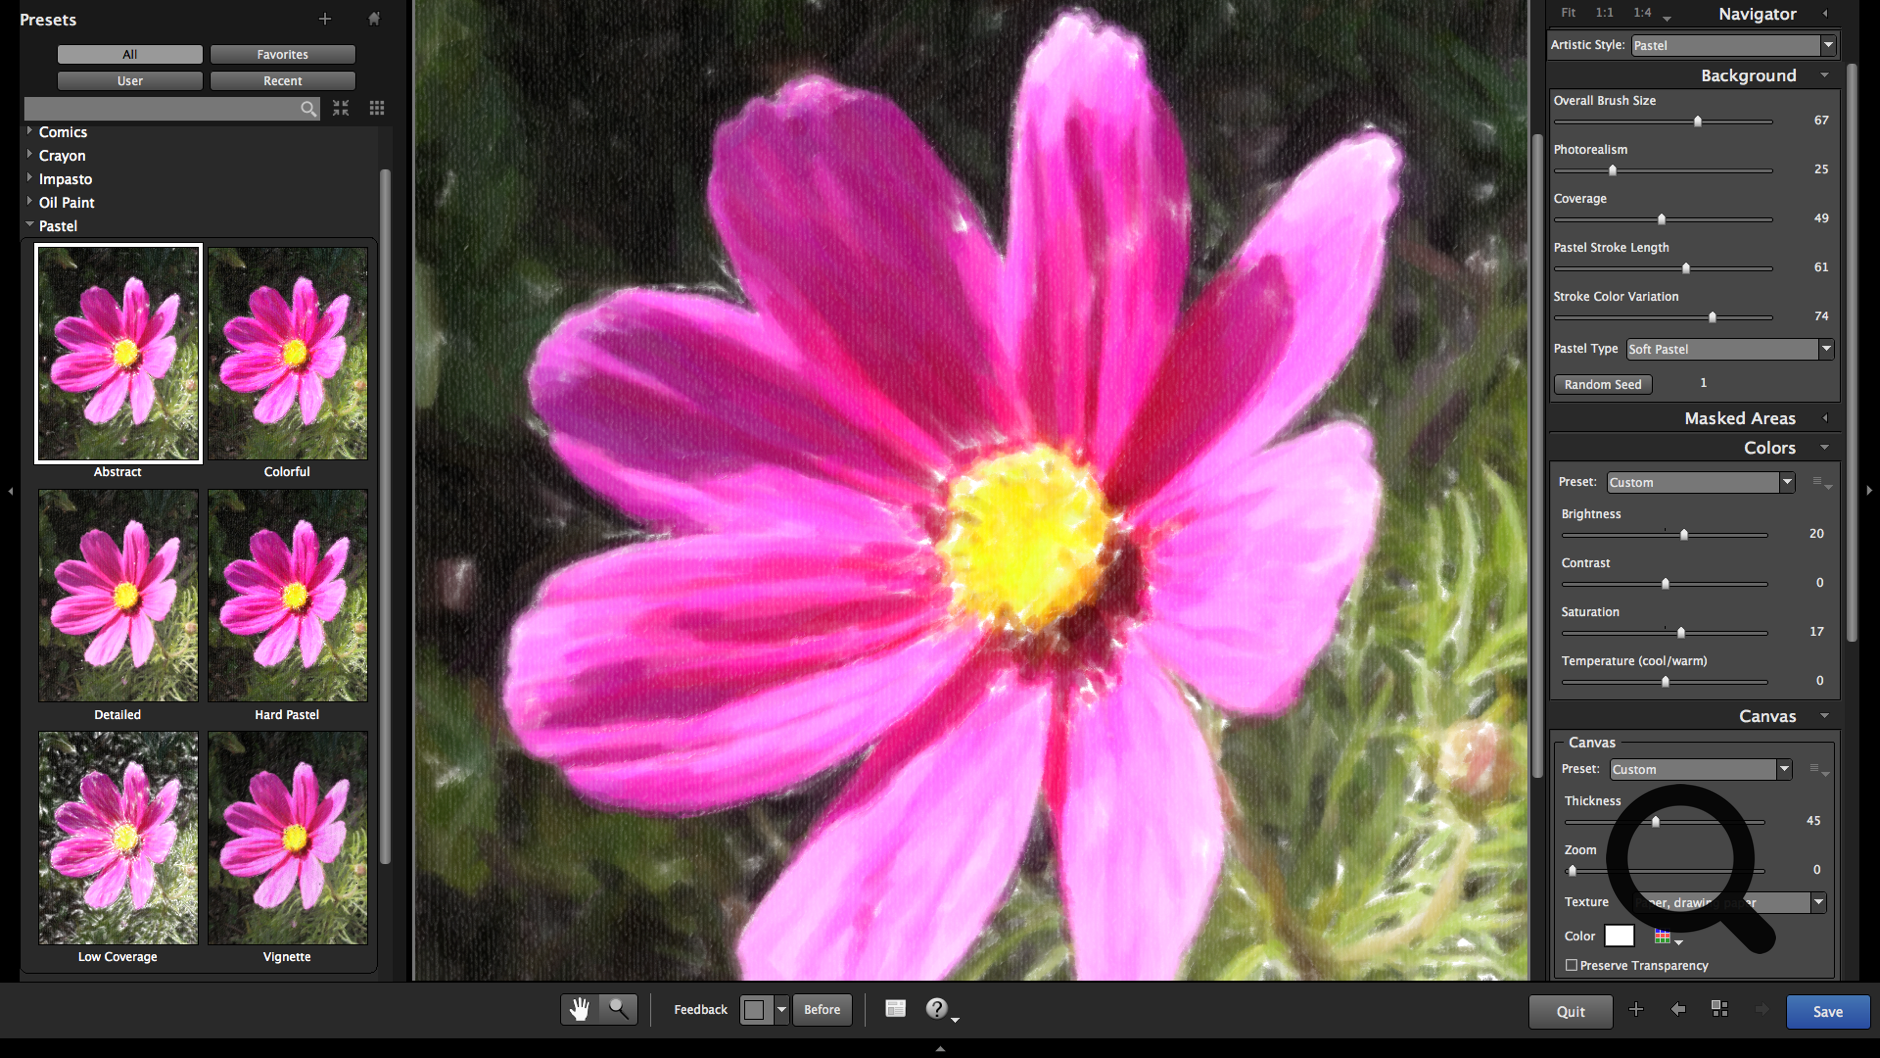 Screenshot of the Alien Skin Photo Bundle showing the results of a preset applied to a purple flower